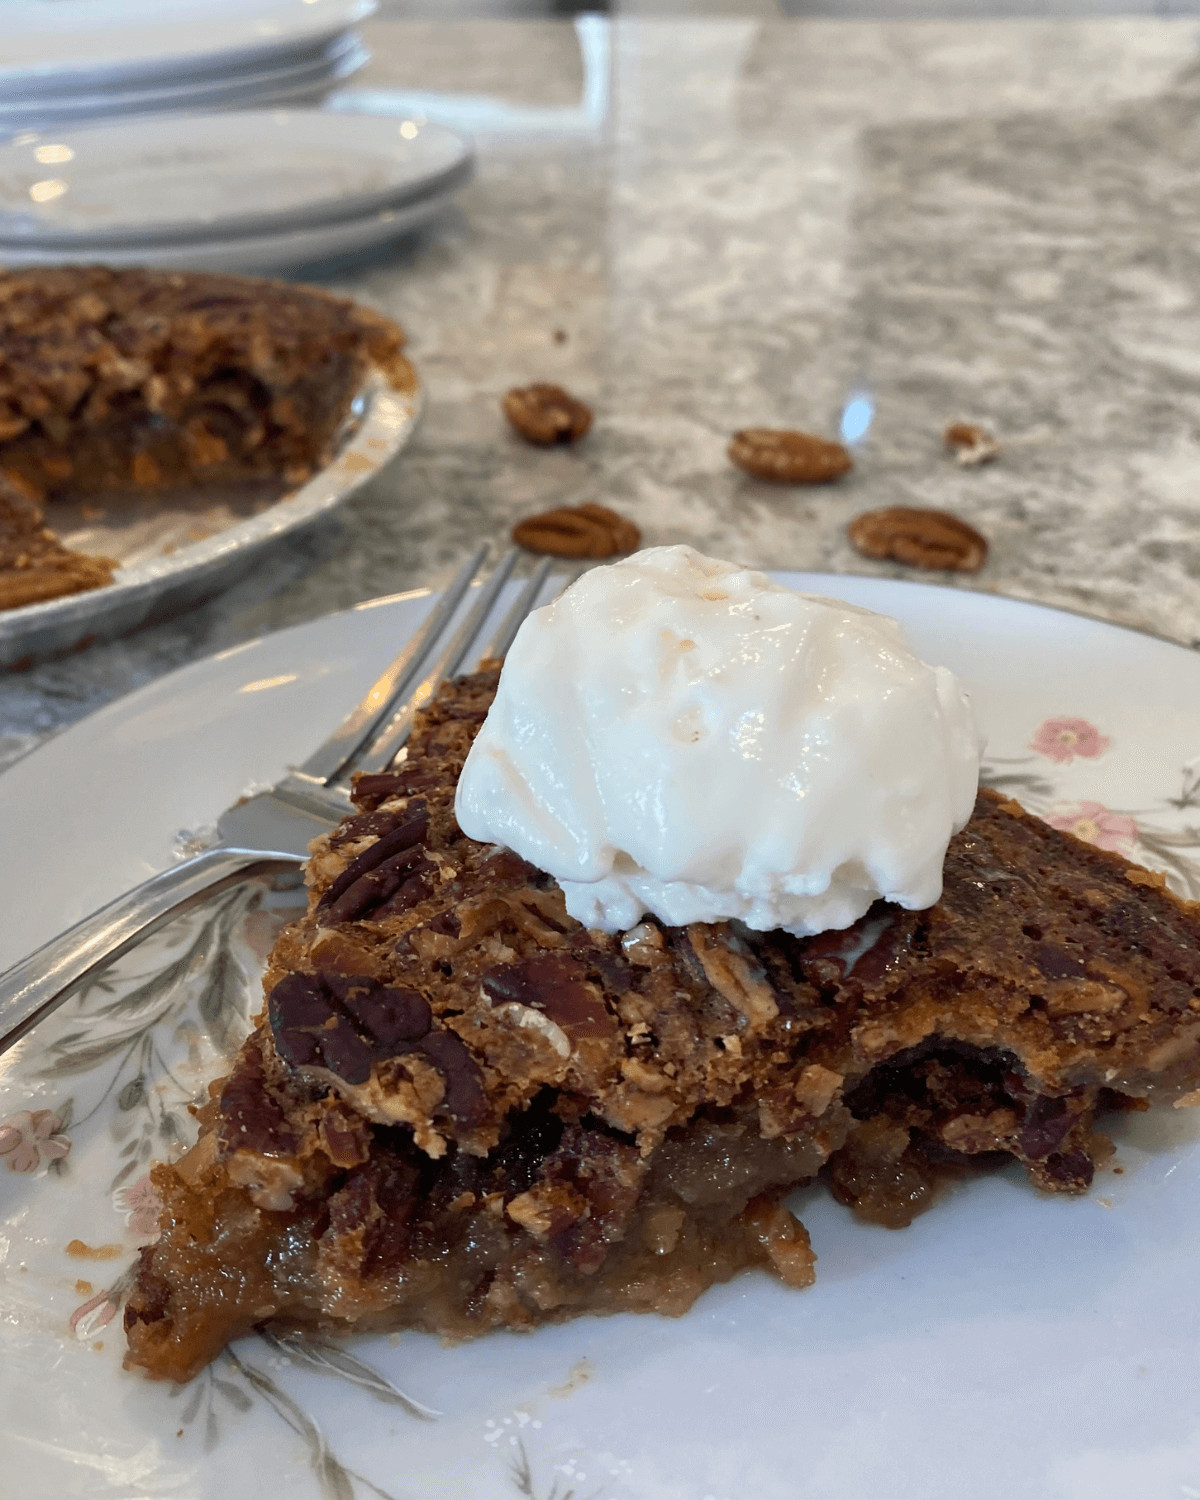 A slice of the no corn syrup pecan pie with whip cream on top.